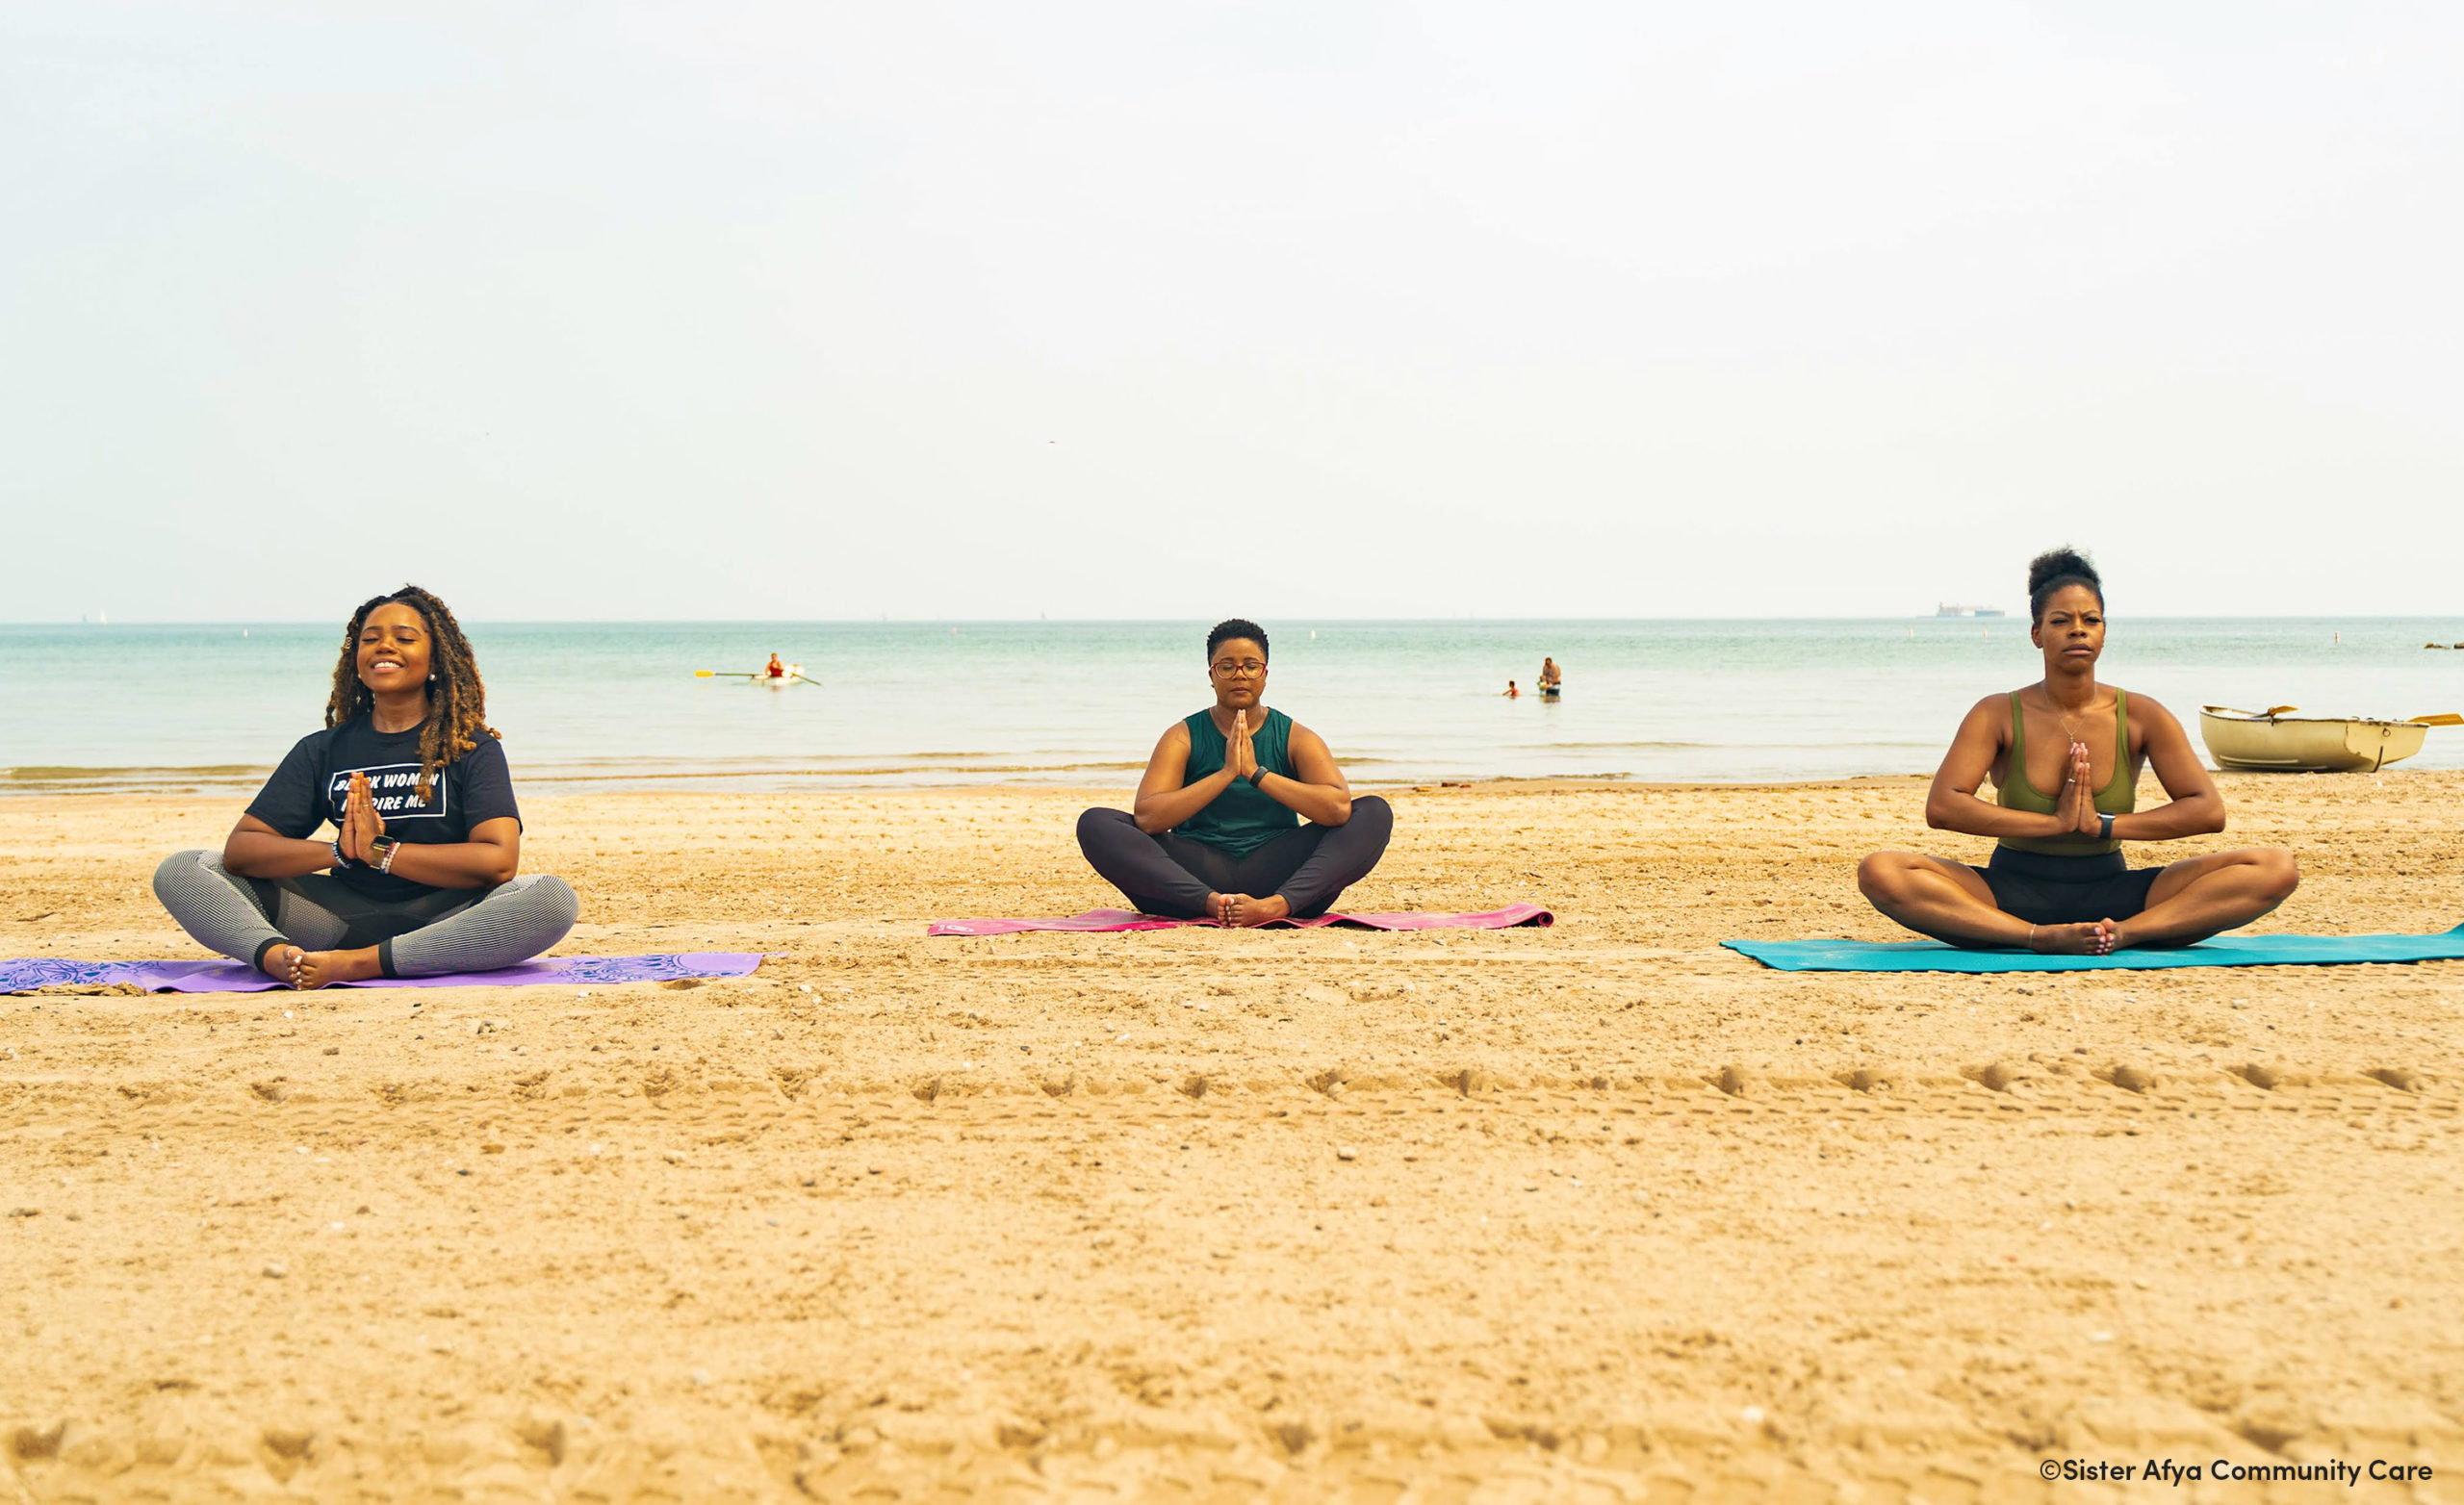 Photo of the Sister Afya Community Care program that shows three women of color in a yoga pose on the beach